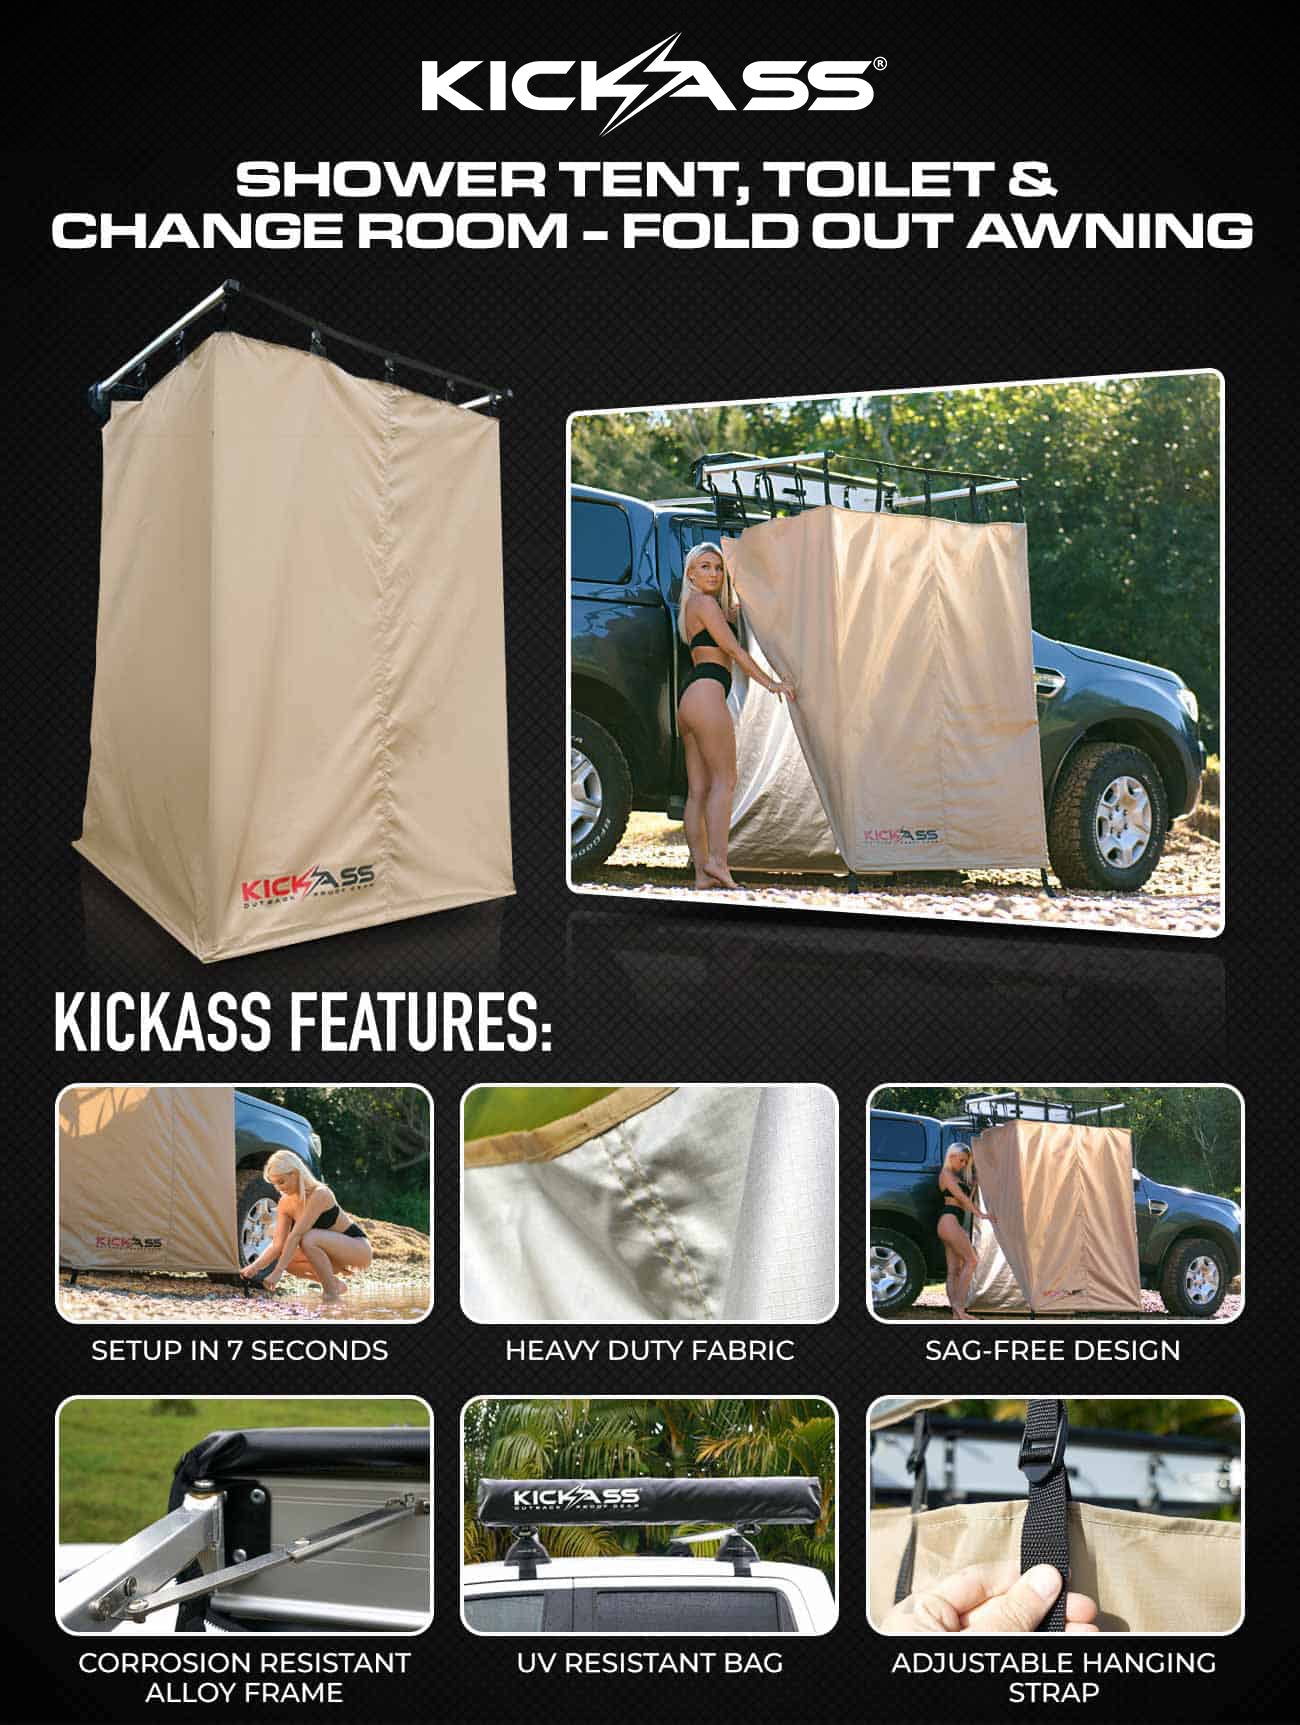 KICKASS Shower Tent, Toilet & Change Room - Fold Out Awning